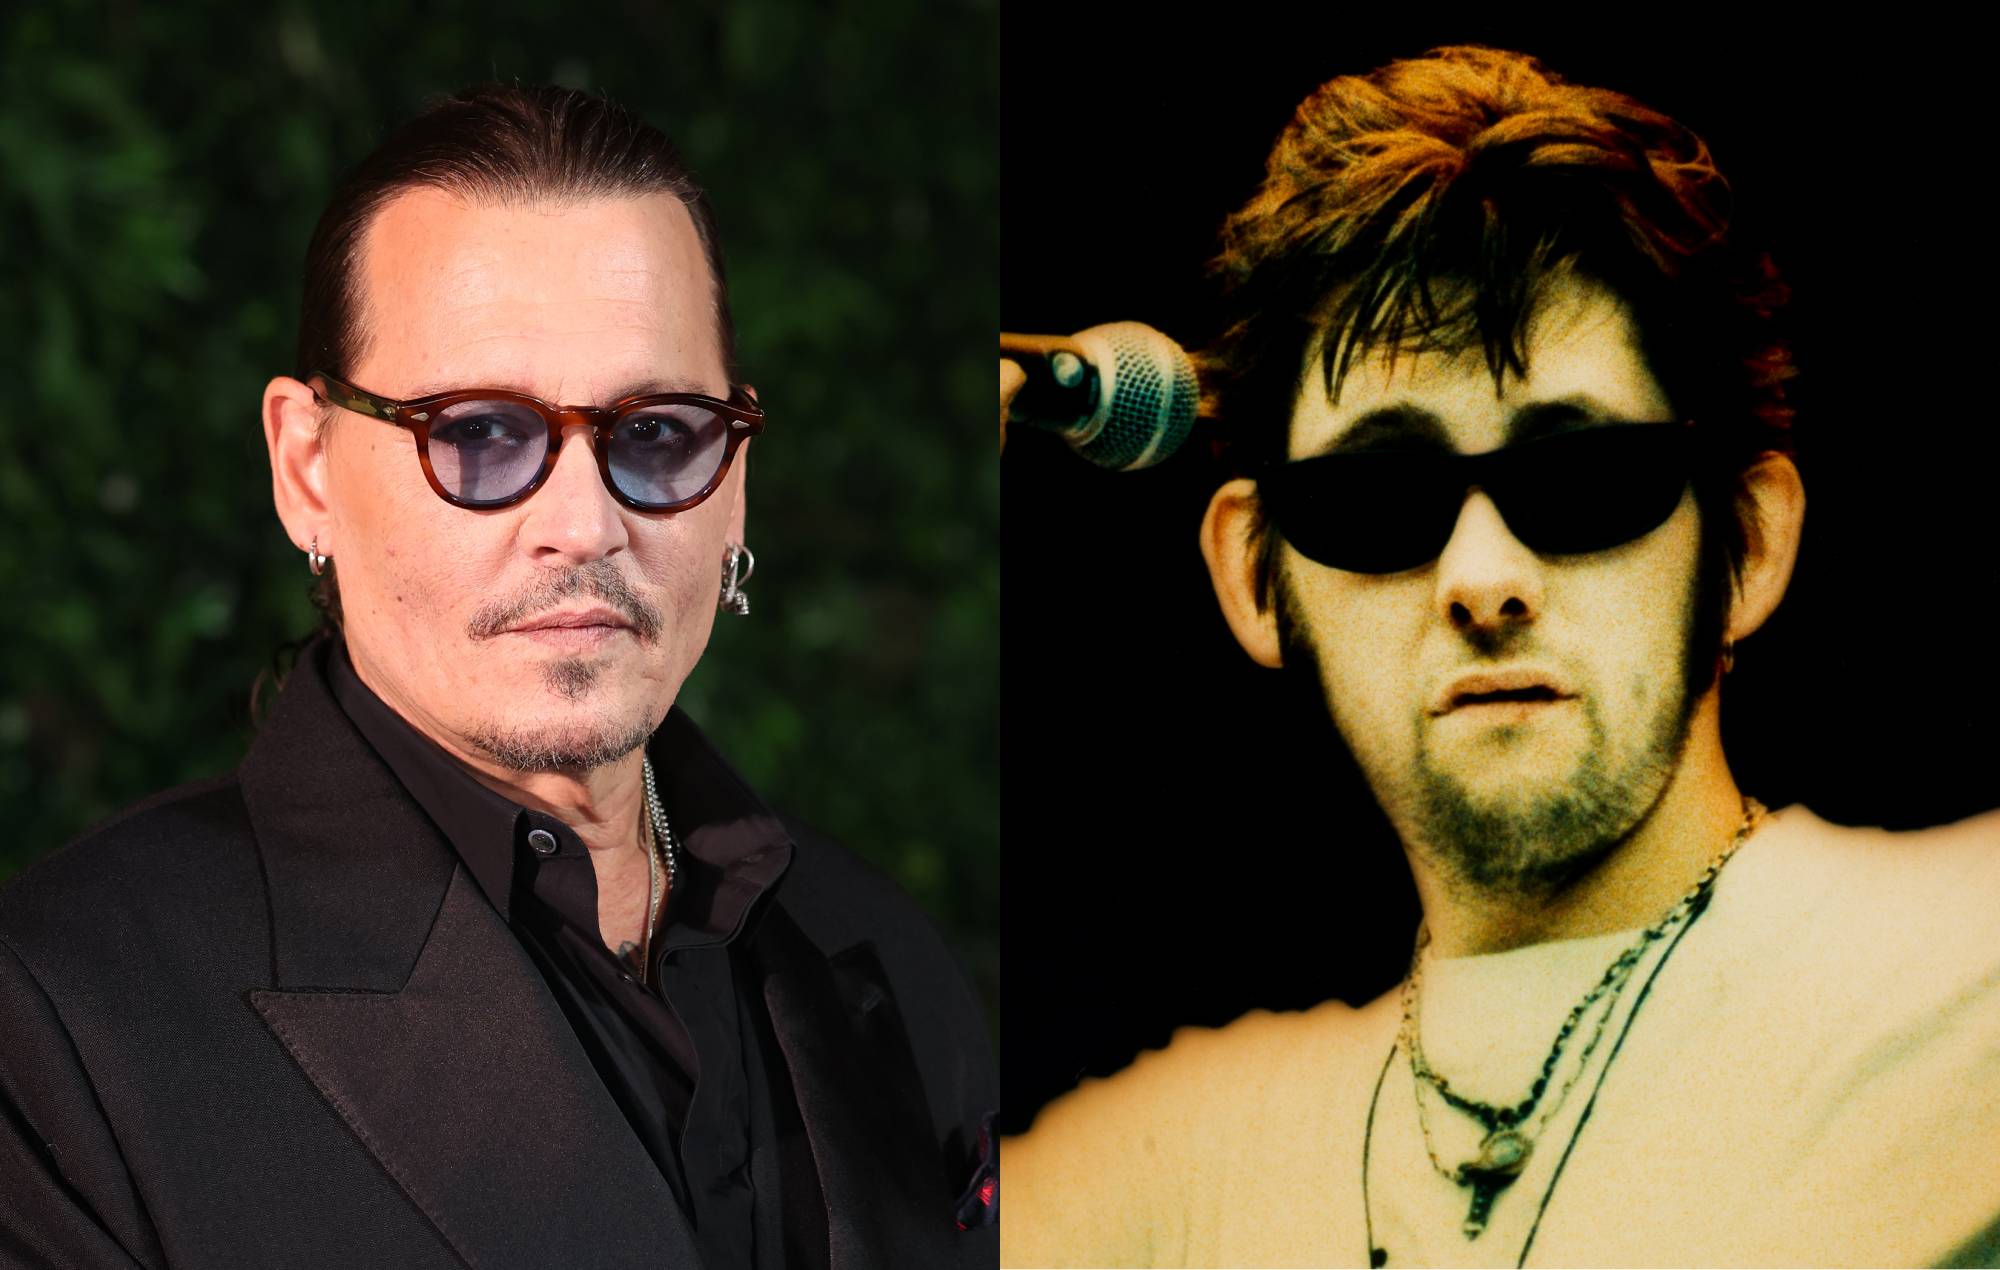 Johnny Depp salutes “maestro” Shane MacGowan during funeral reading